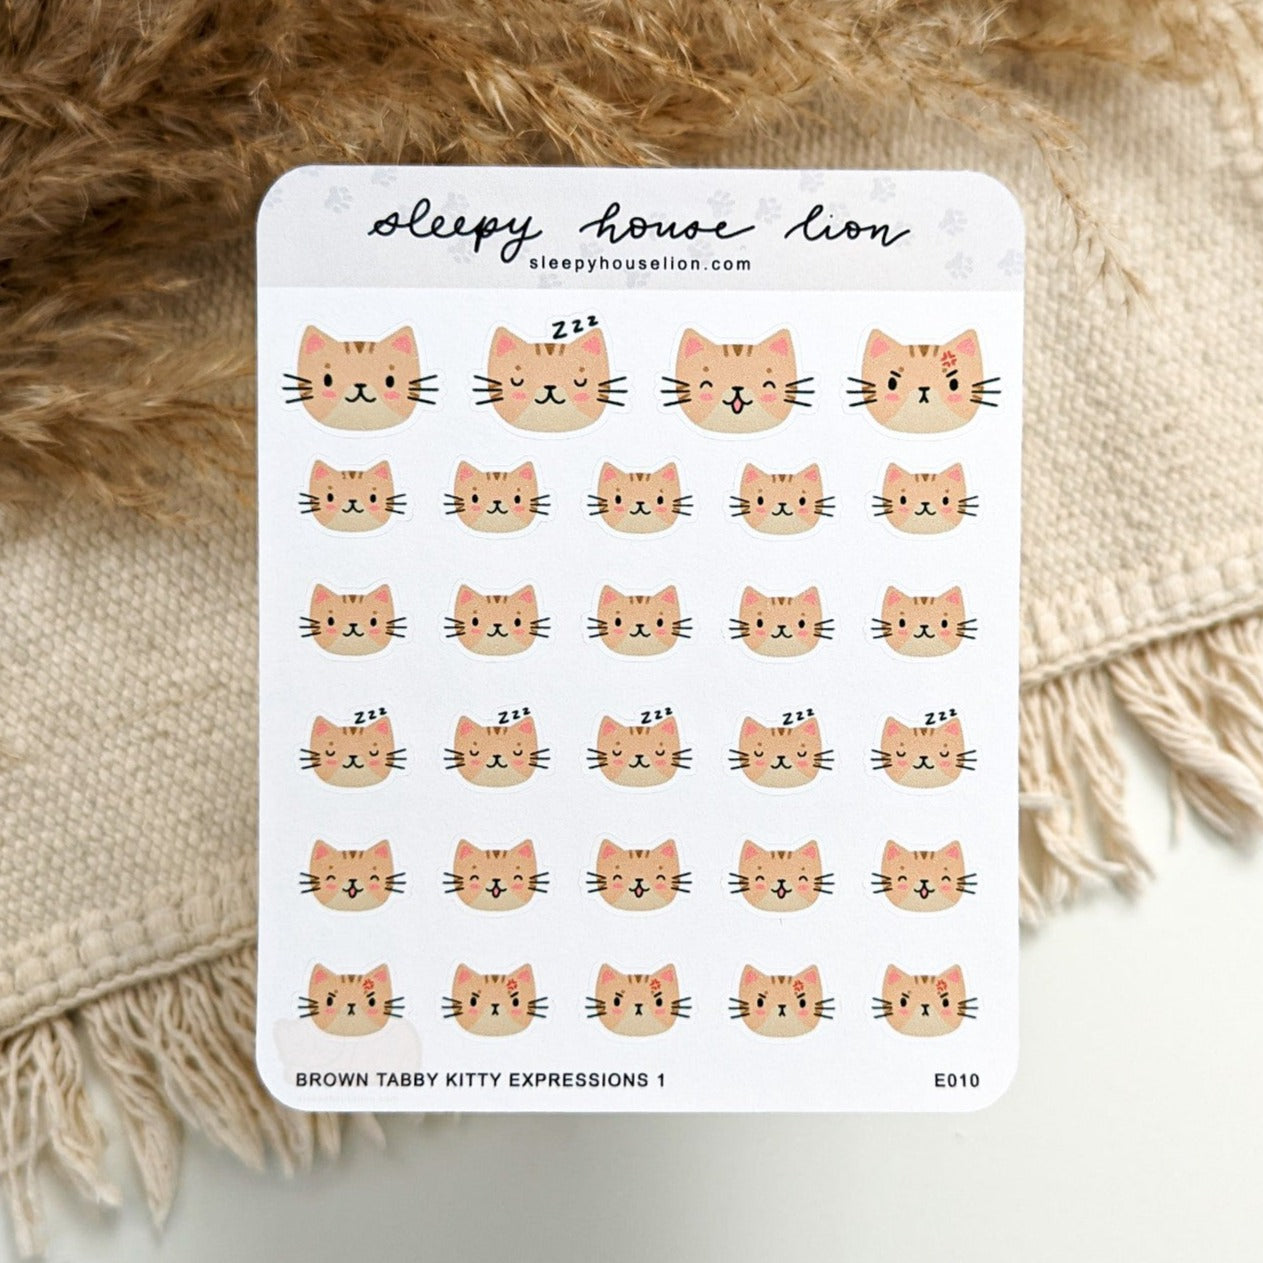 BROWN TABBY KITTY EXPRESSIONS STICKER SHEET